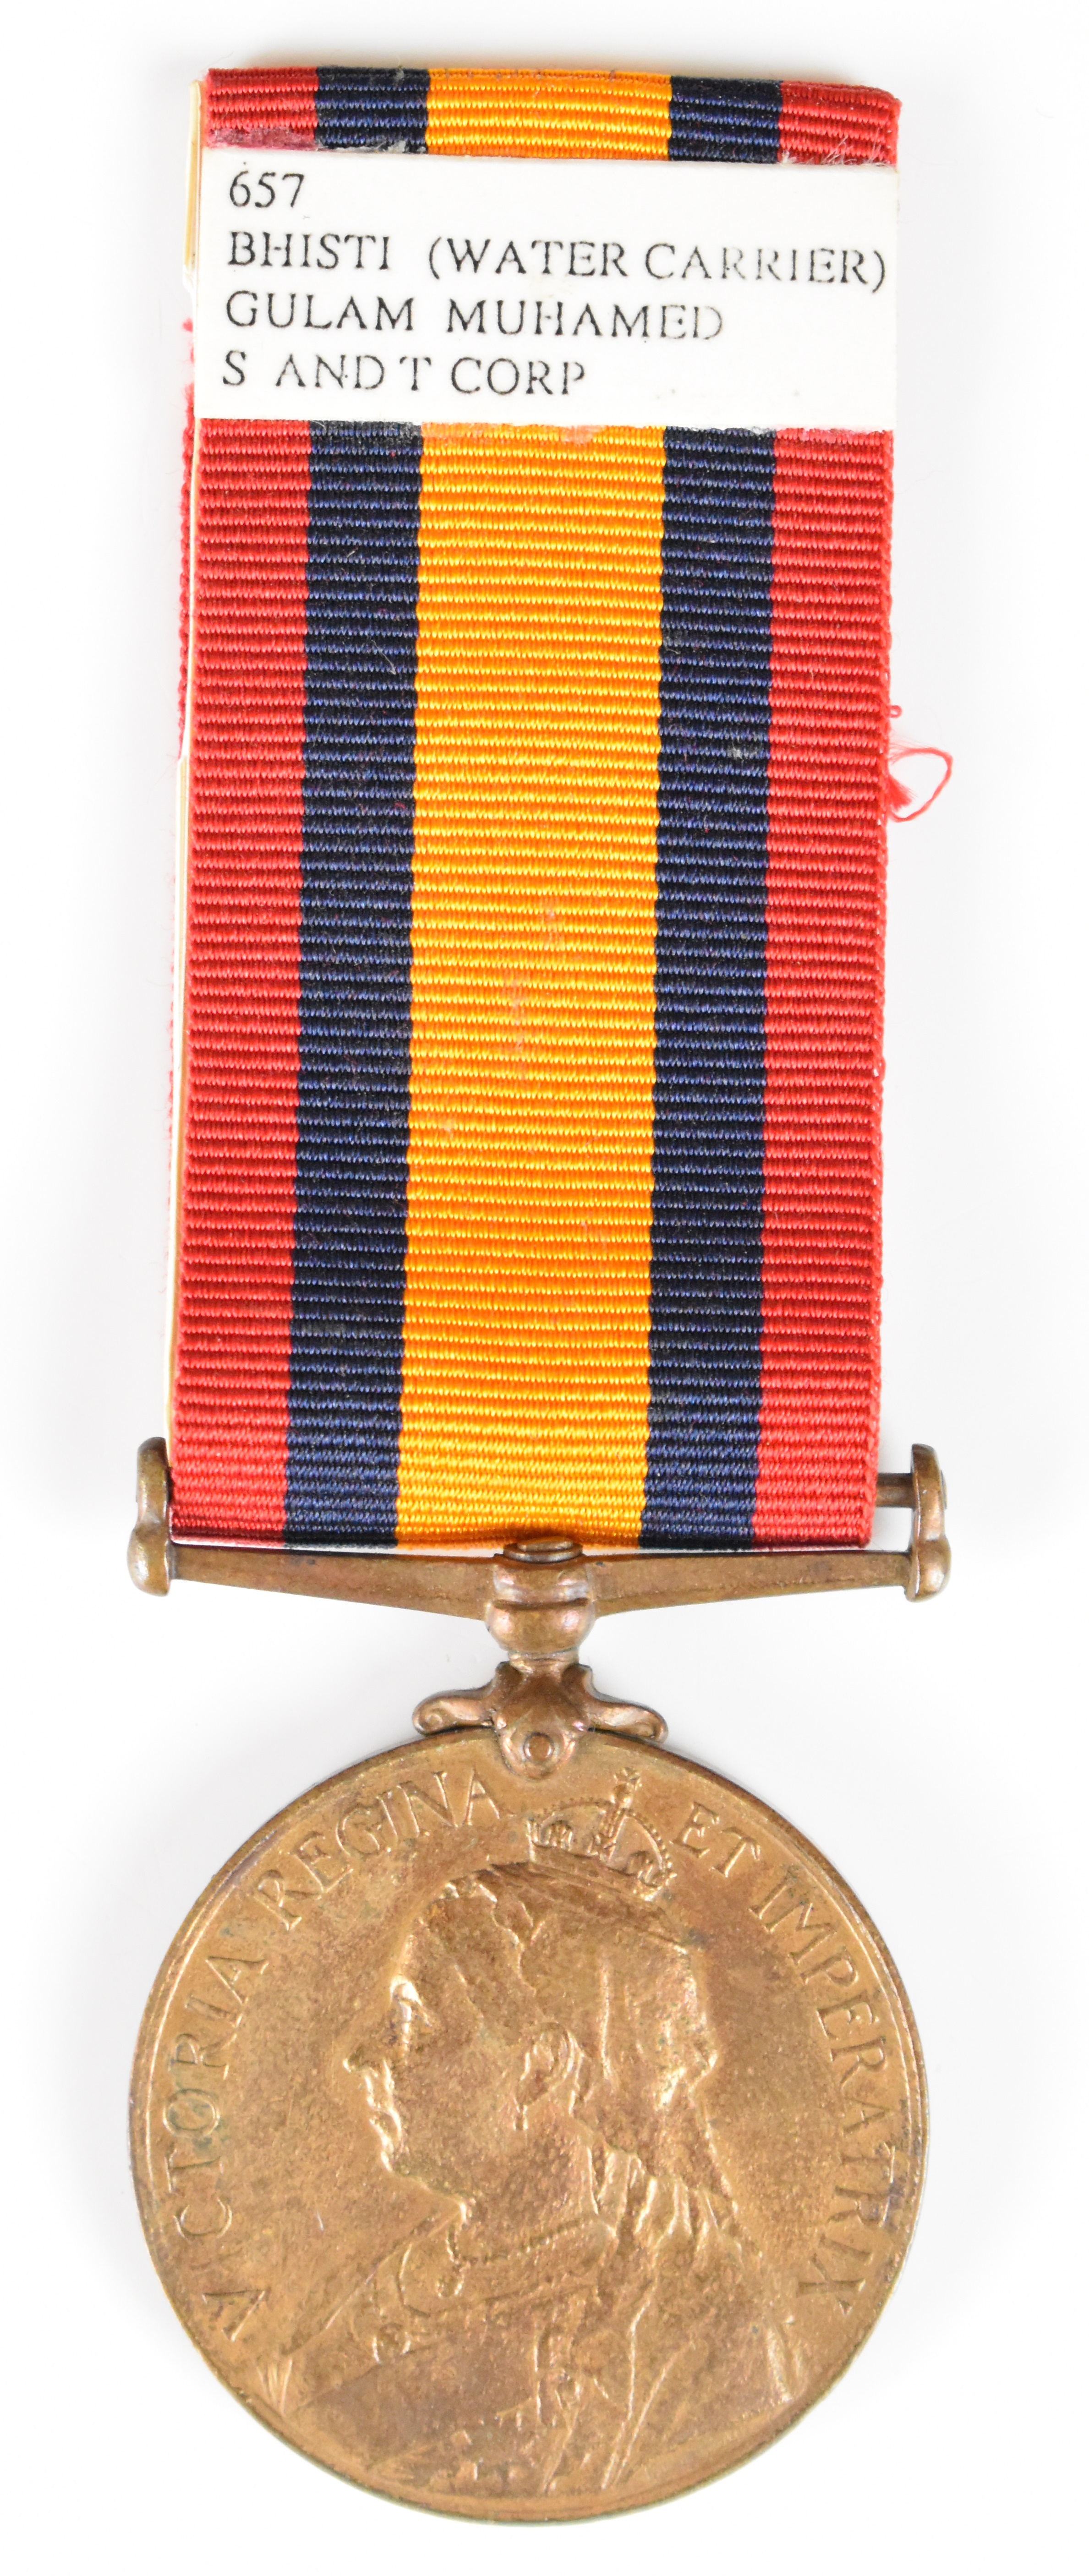 Queen's South Africa Medal in bronze, named to 657 Bhisti (Water Carrier) Gulam Muhamed, S & T Corps